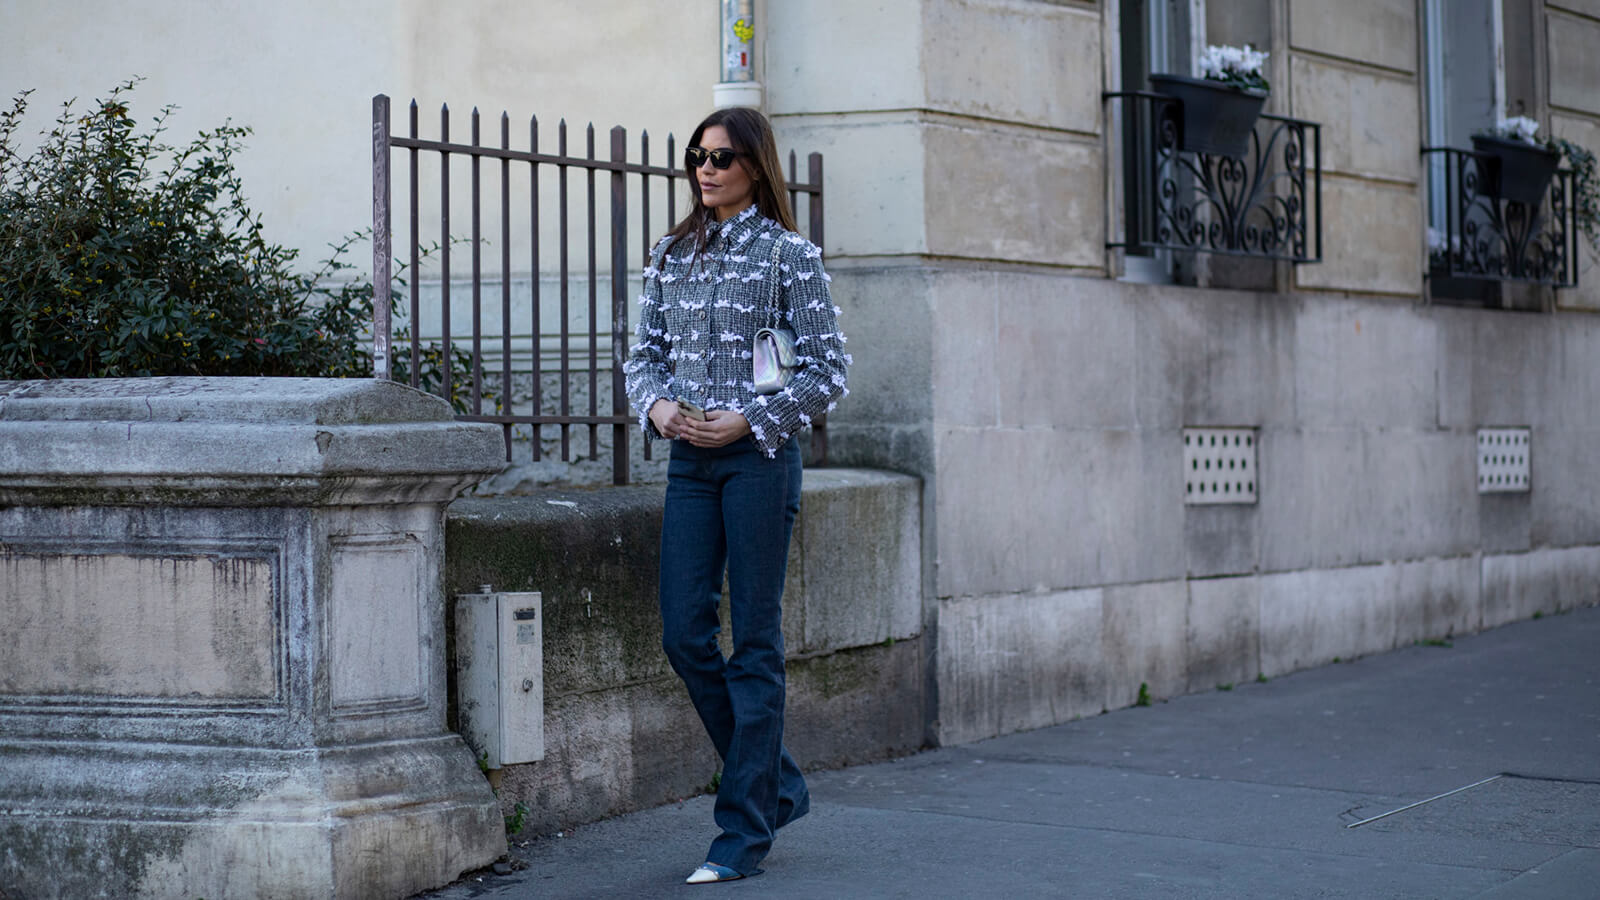 Denim has become the perfect weather transition accent for